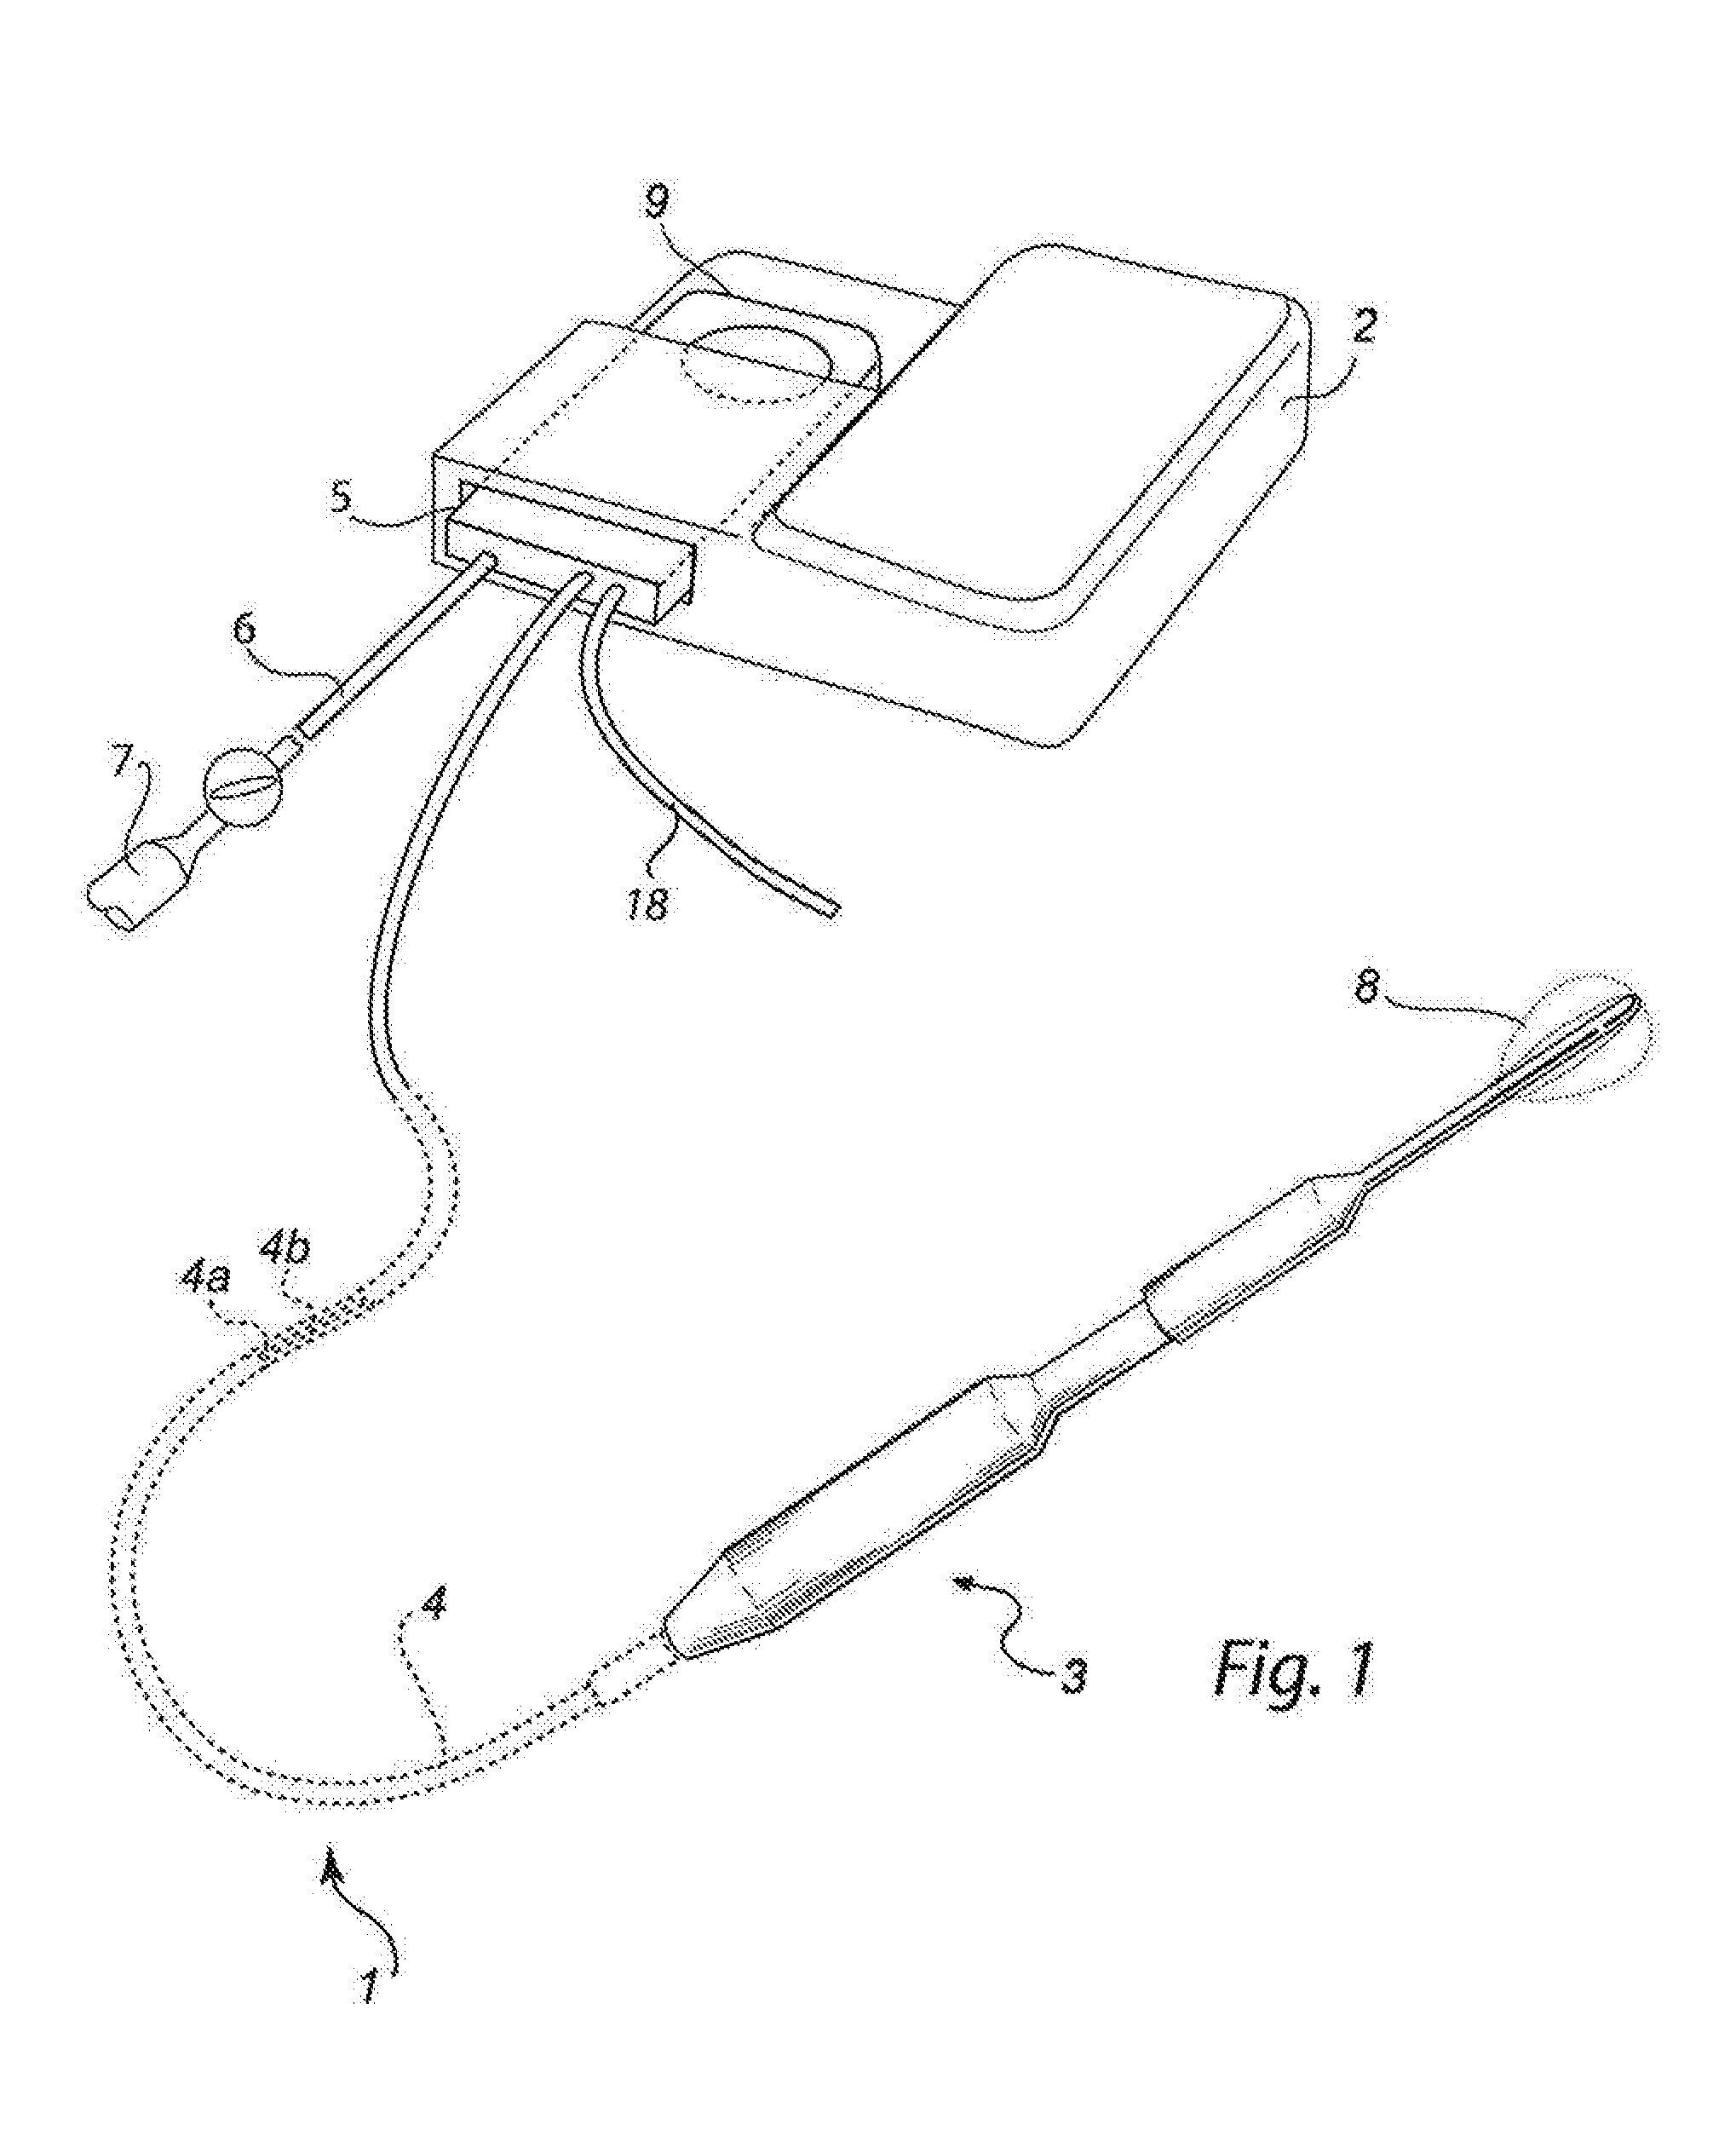 Apparatus for performing heat treatment